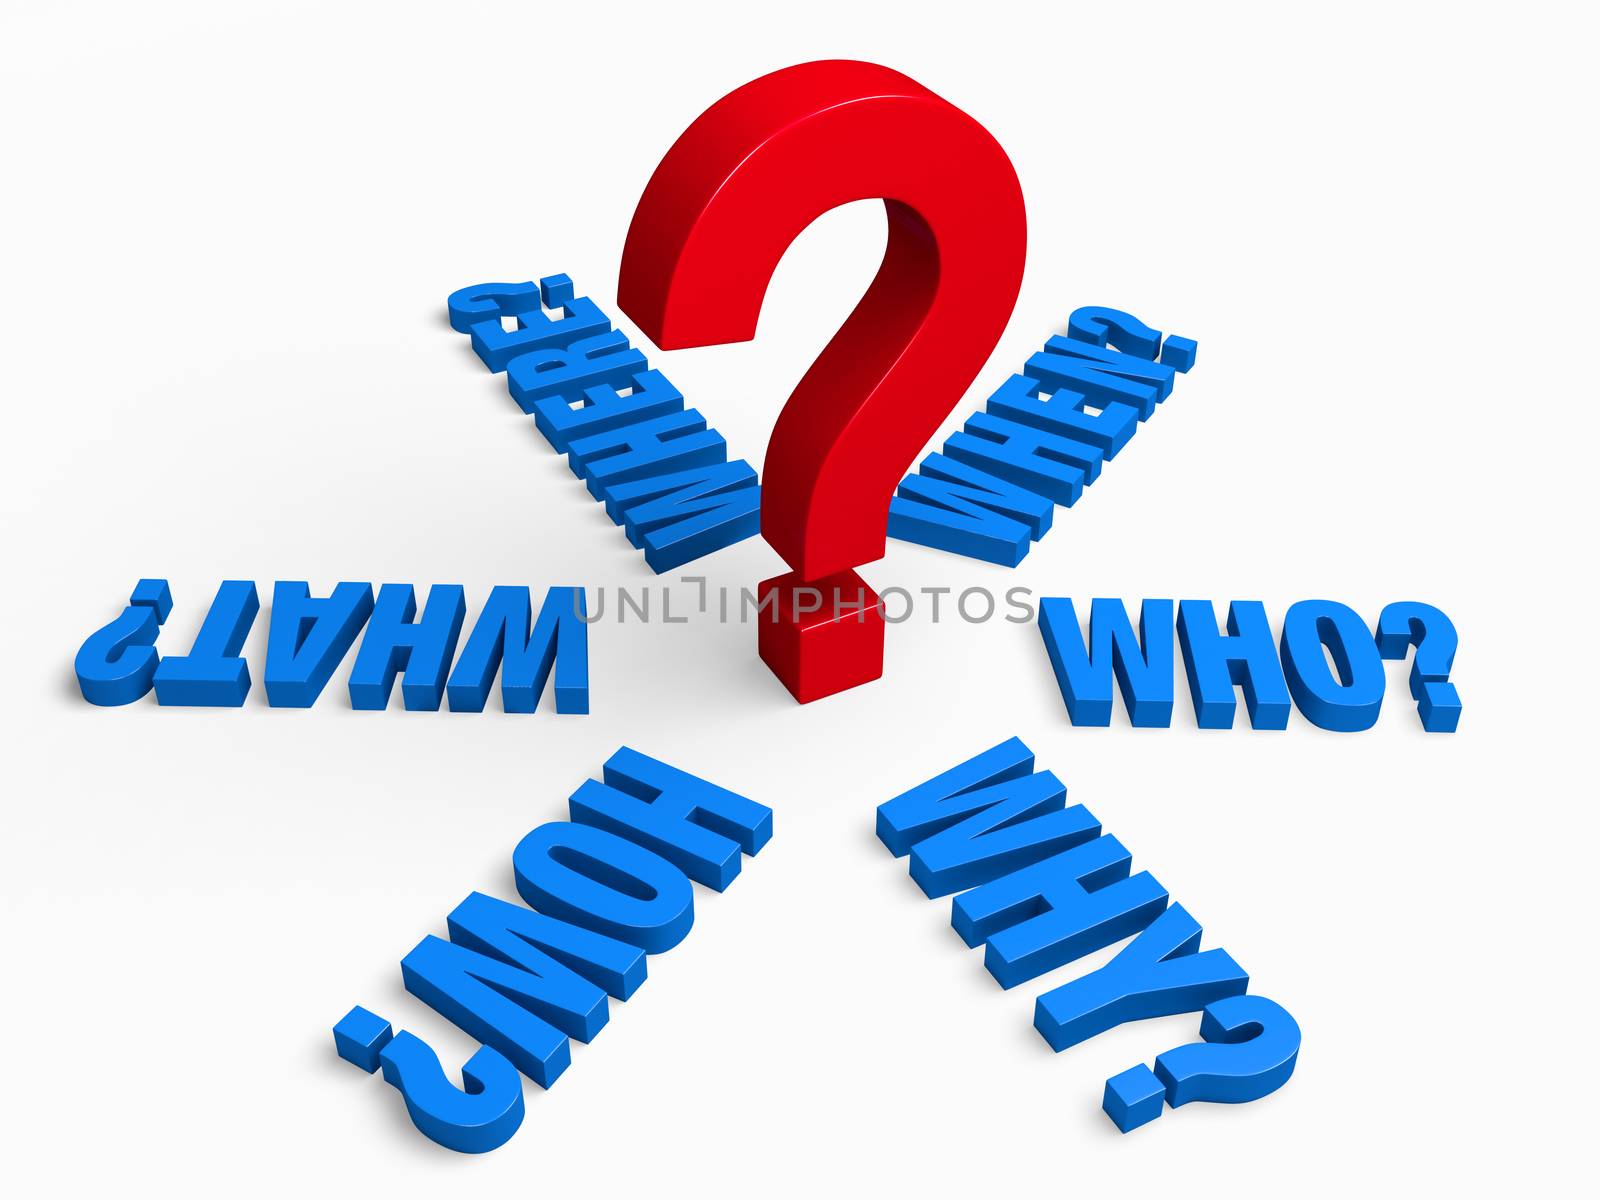 The words,  "WHO?", "WHAT?", "WHERE?", "WHEN?", "HOW?", and "WHY?" in blue radiate outwards from a large, red question mark.  Isolated on white.
